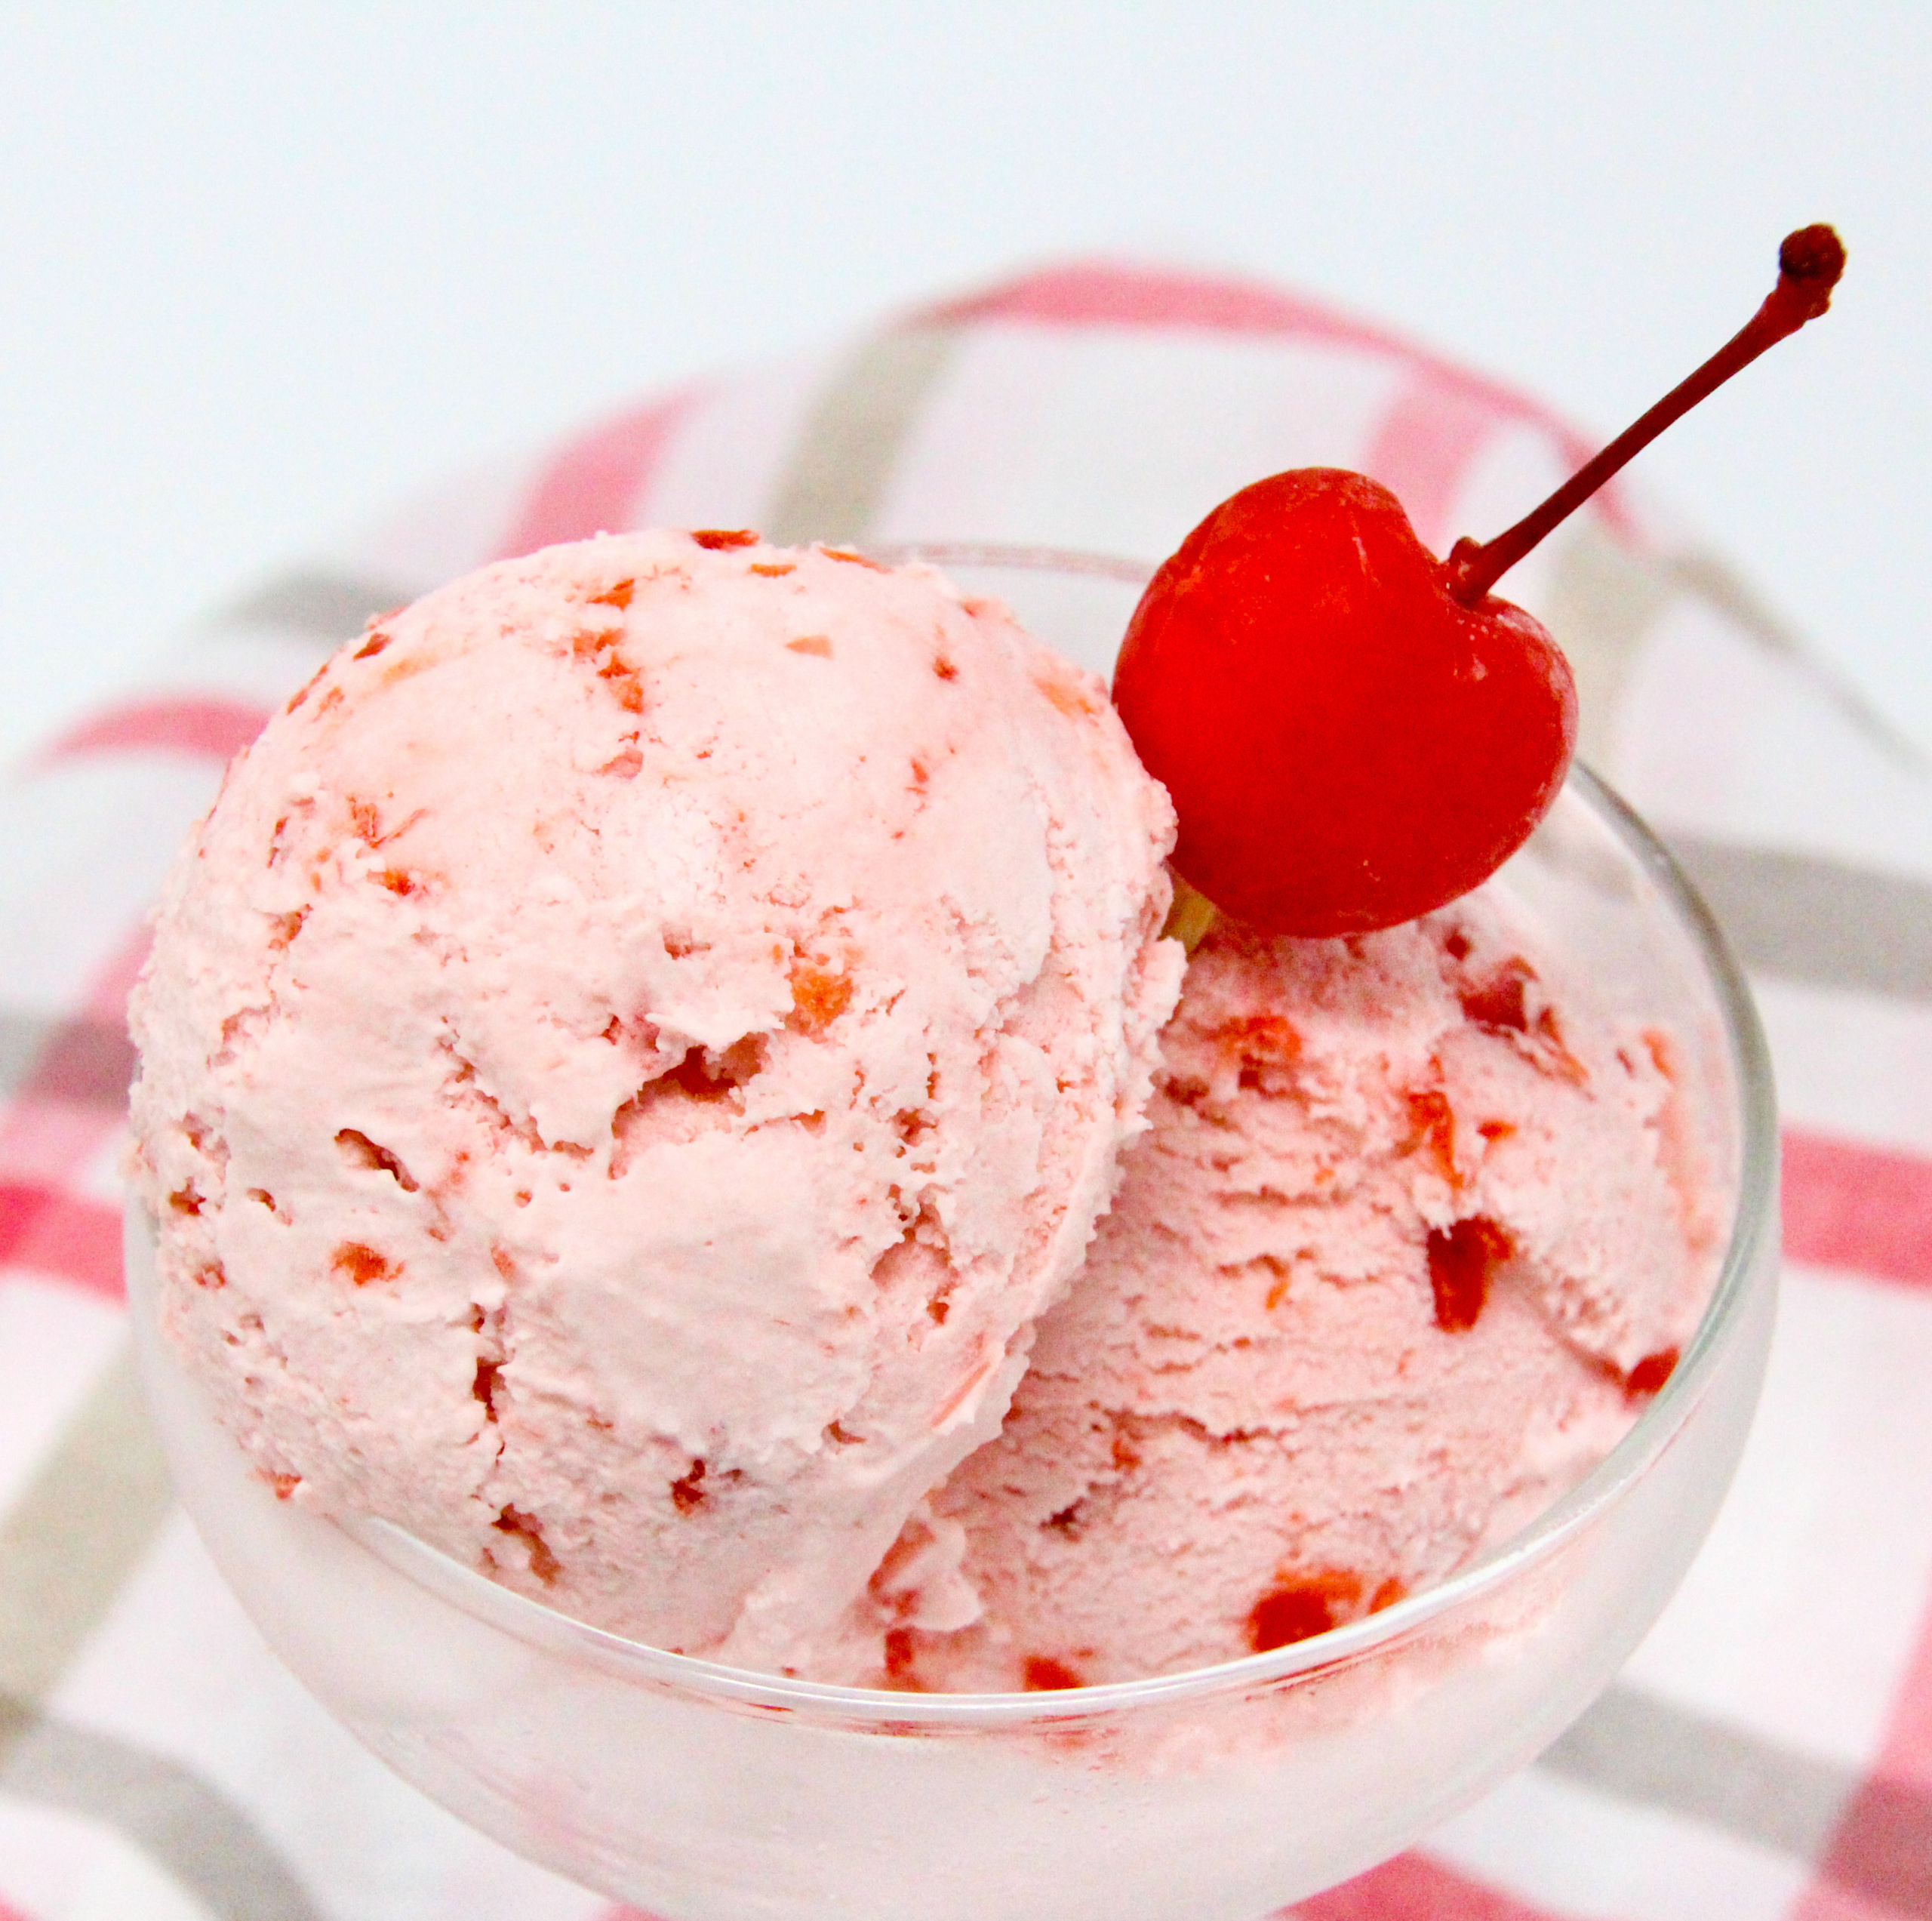 Cheery Cherry “Do-it-Yourself” Pickle Jar Ice Cream starts with 5 ingredients, a clean pickle jar, and lots of shaking. The resulting treat is a delicious frozen dessert sure to please kids and adults alike! Recipe shared with permission granted by Dana Mentink, author of A SPRINKLE IN TIME.